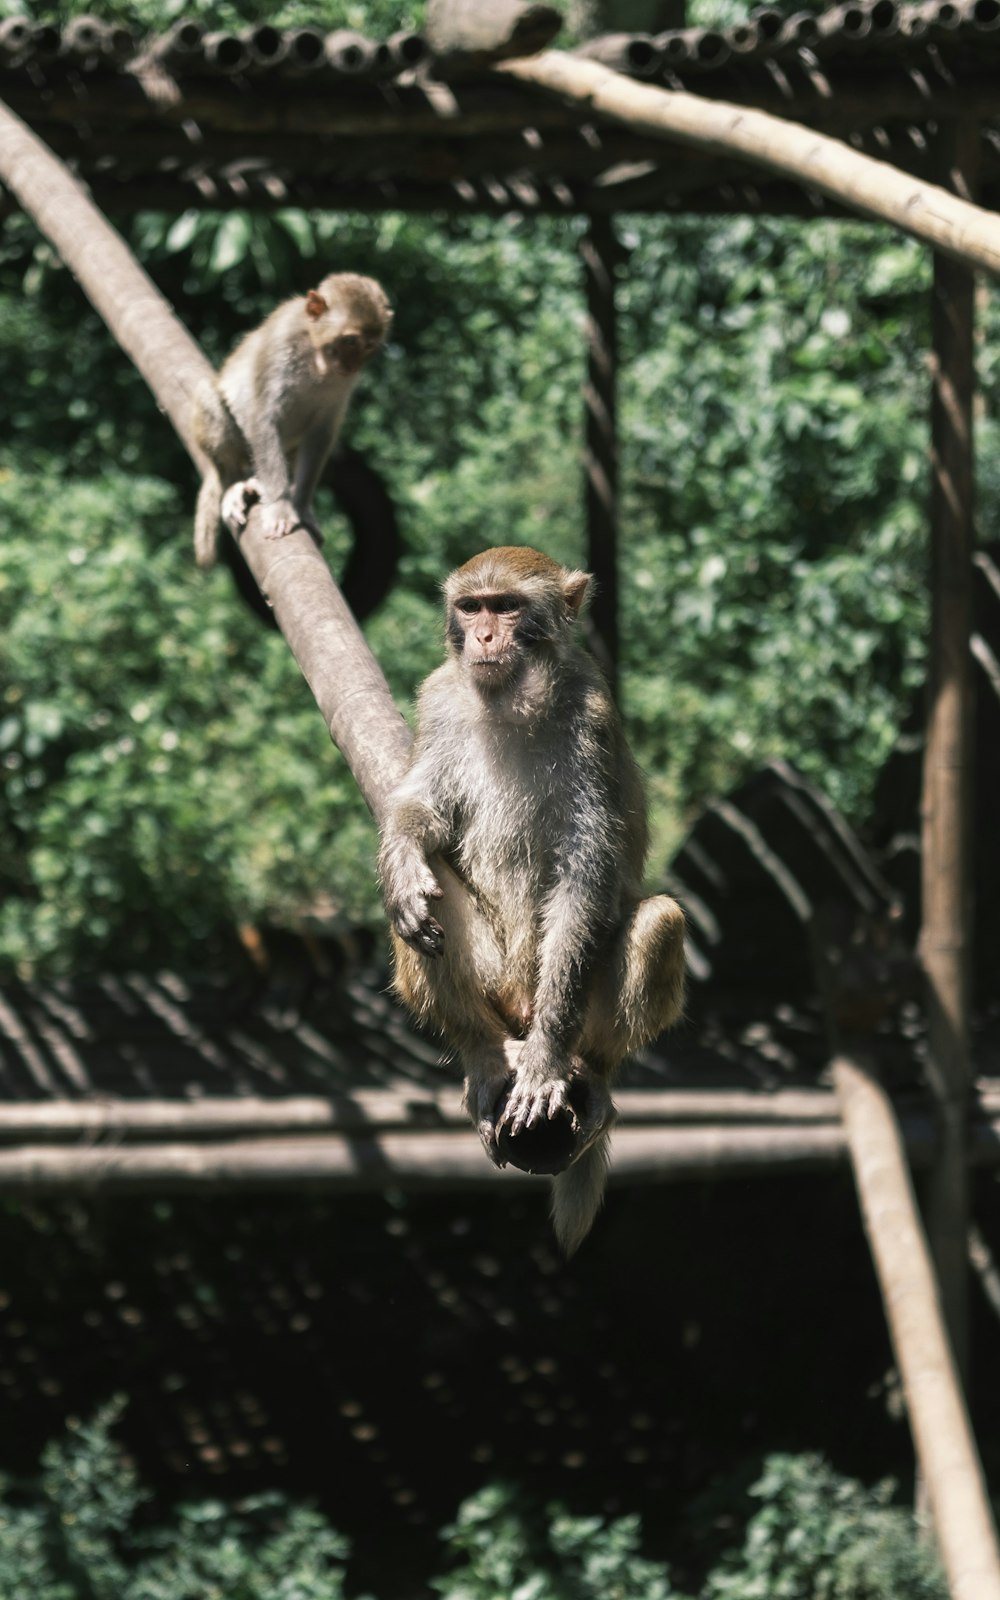 a monkey sitting on a tree branch in a zoo